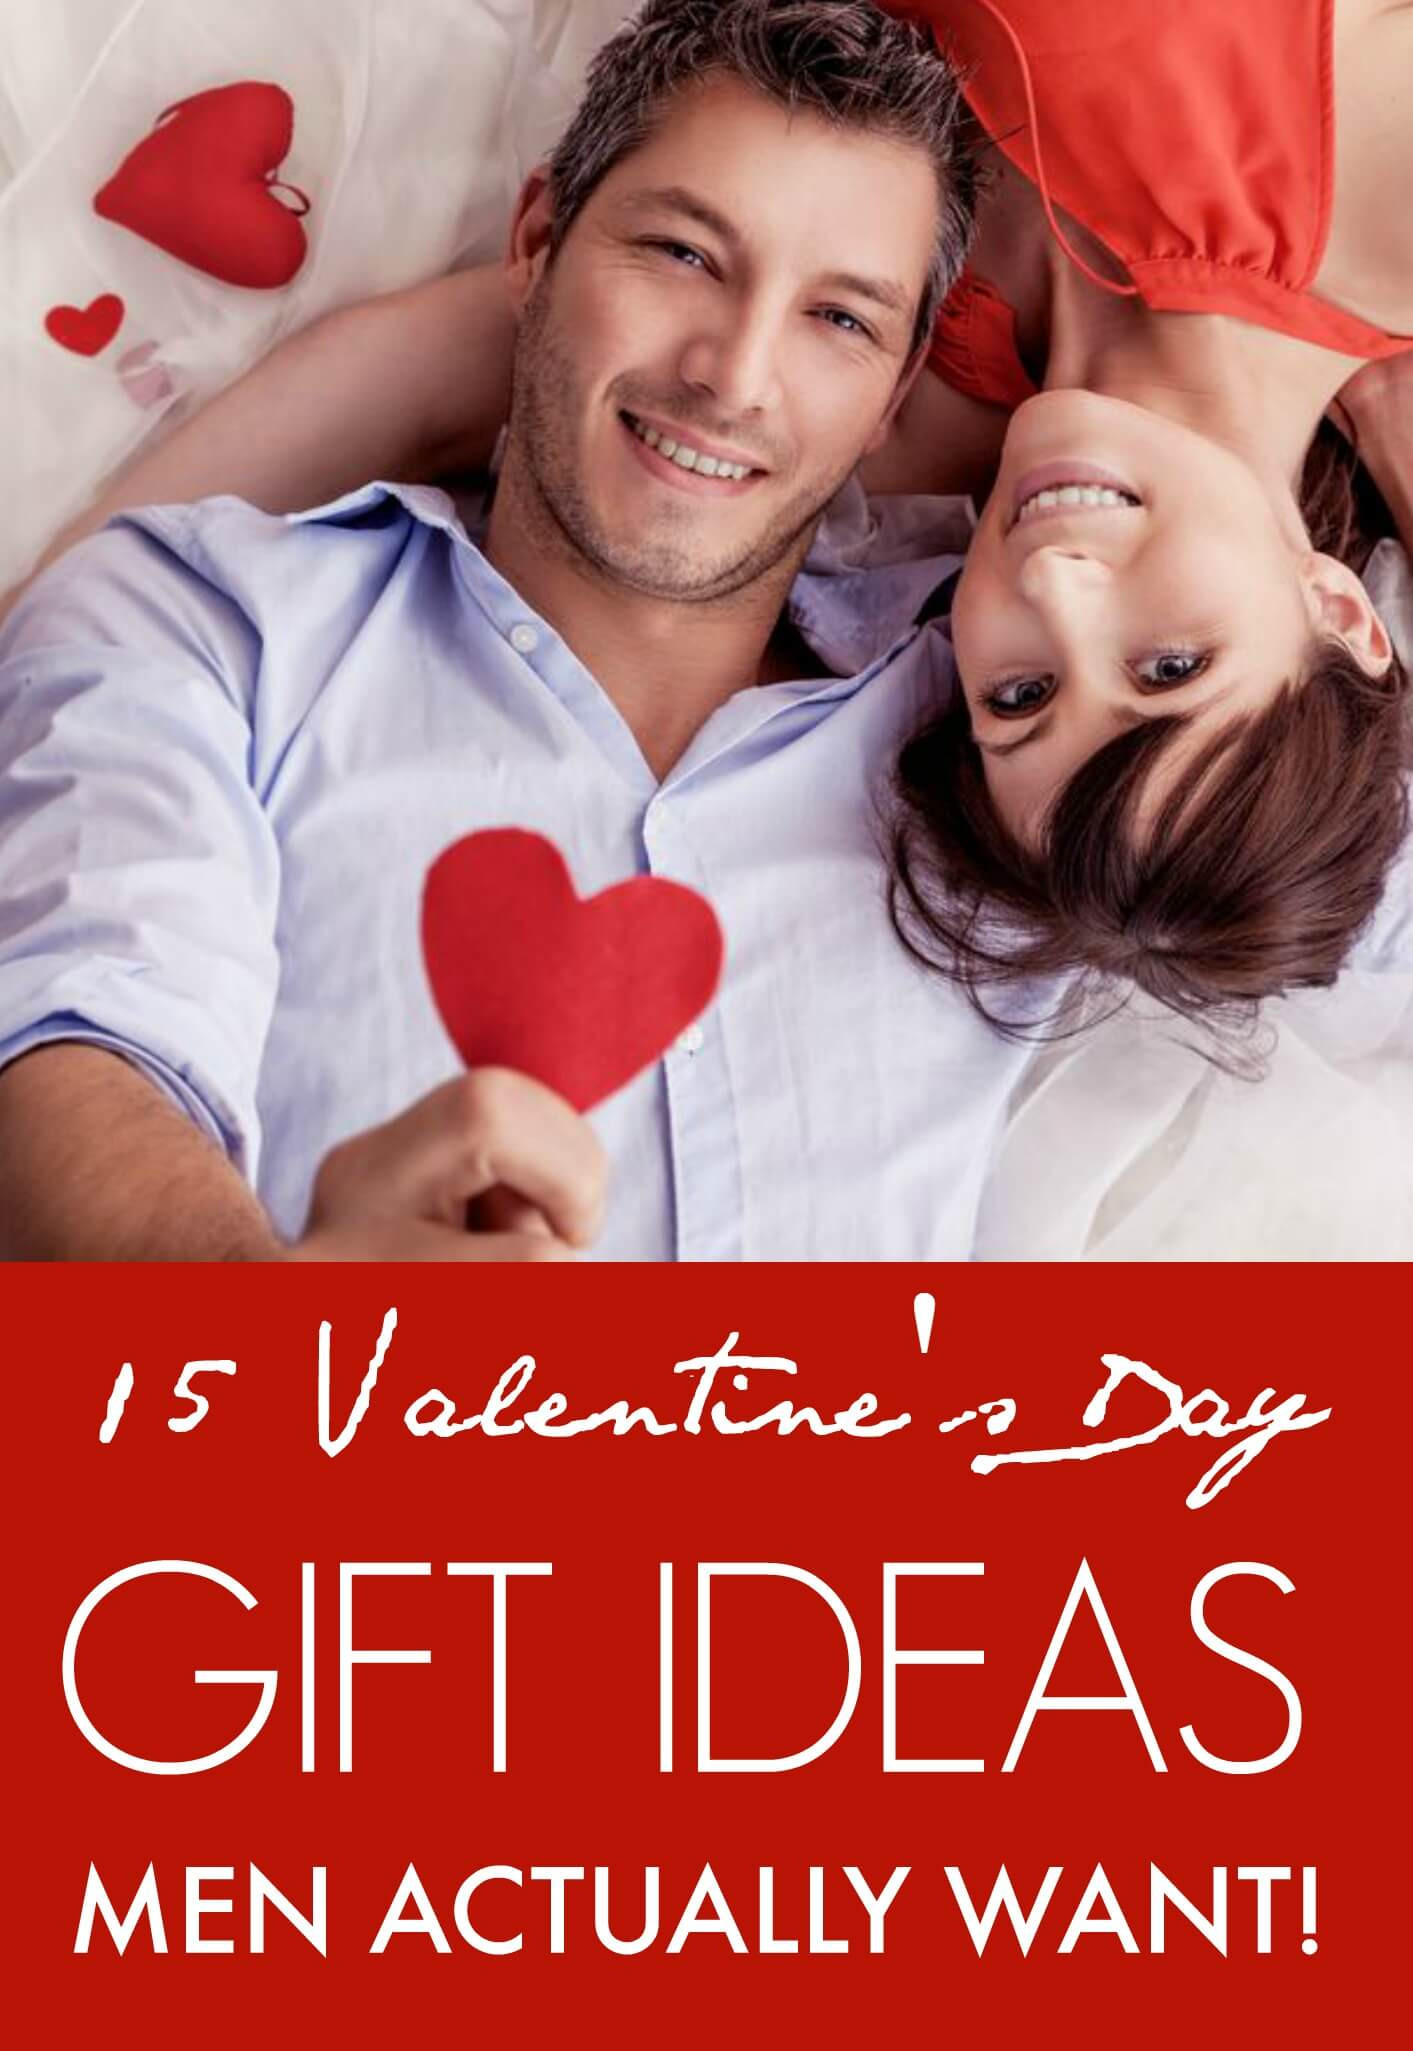 Valentine'S Day Gift Ideas For Men
 15 Valentine’s Day Gift ideas Men Actually Want